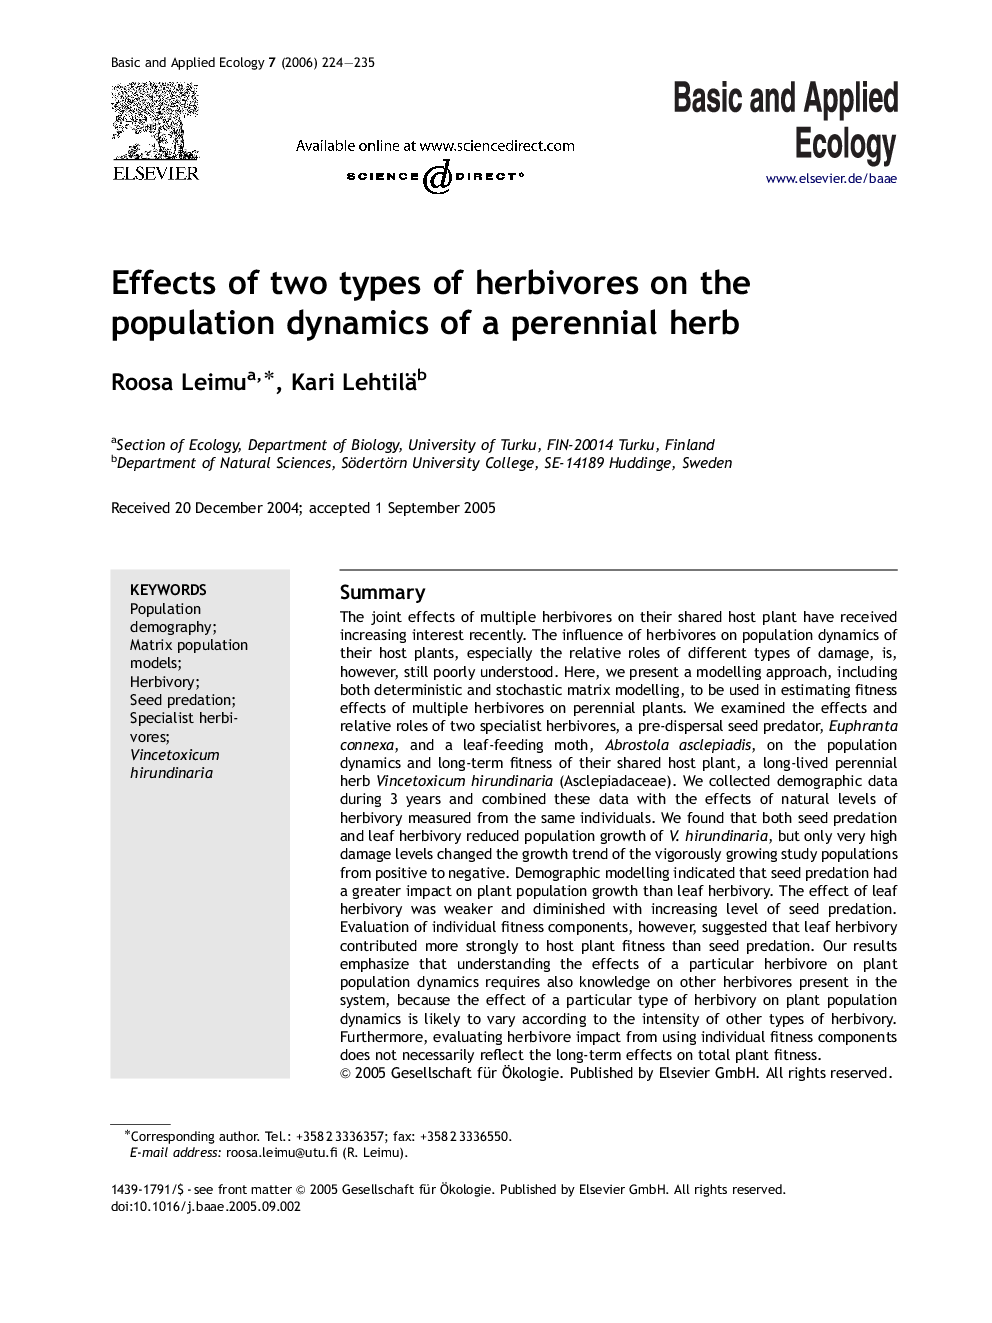 Effects of two types of herbivores on the population dynamics of a perennial herb